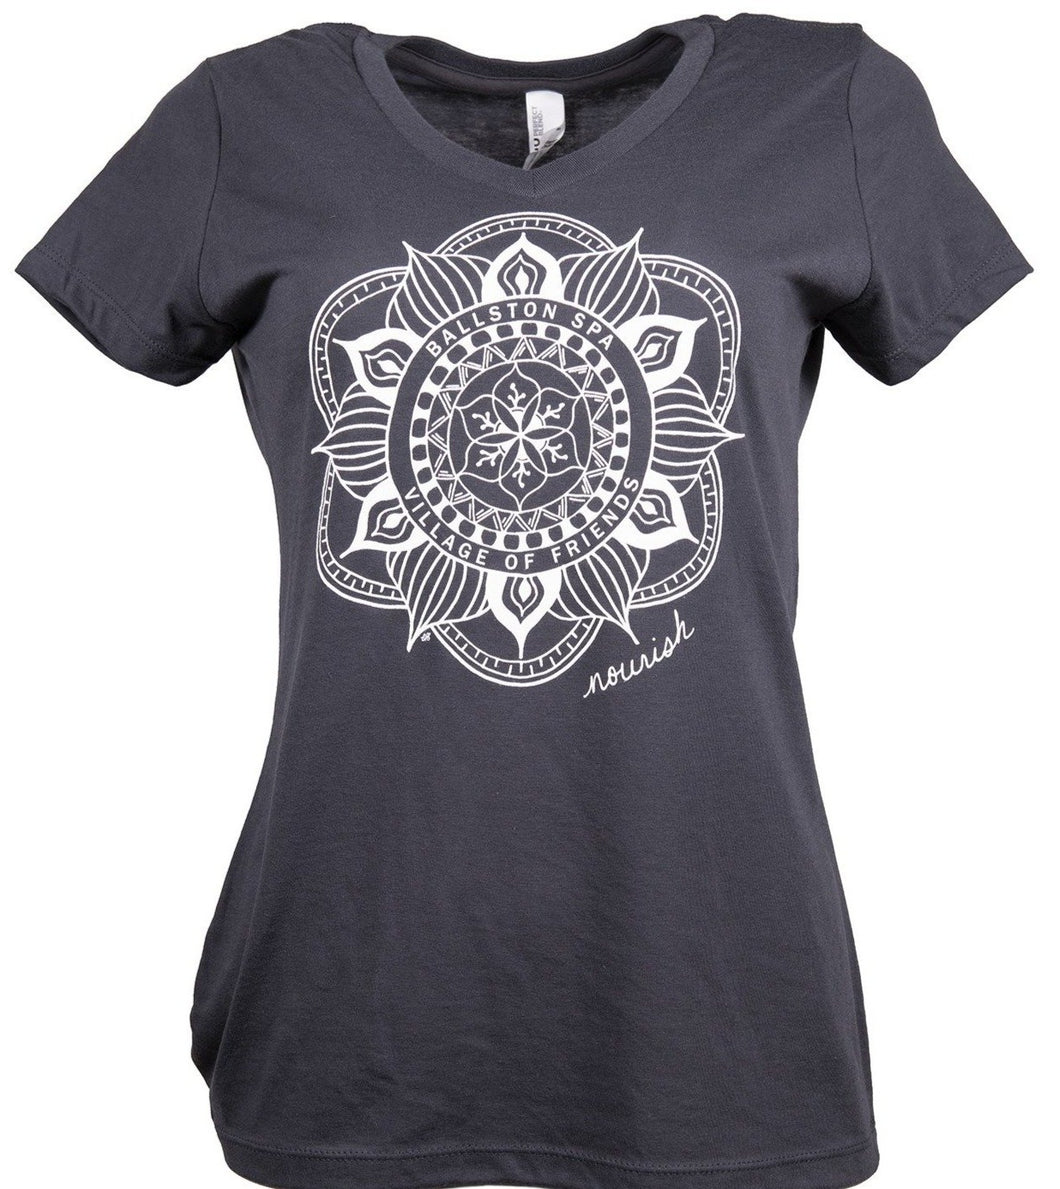 Product Image : Front View - Grey - Women's  V-neck Tee with large white Ballston Spa Mandala in the center